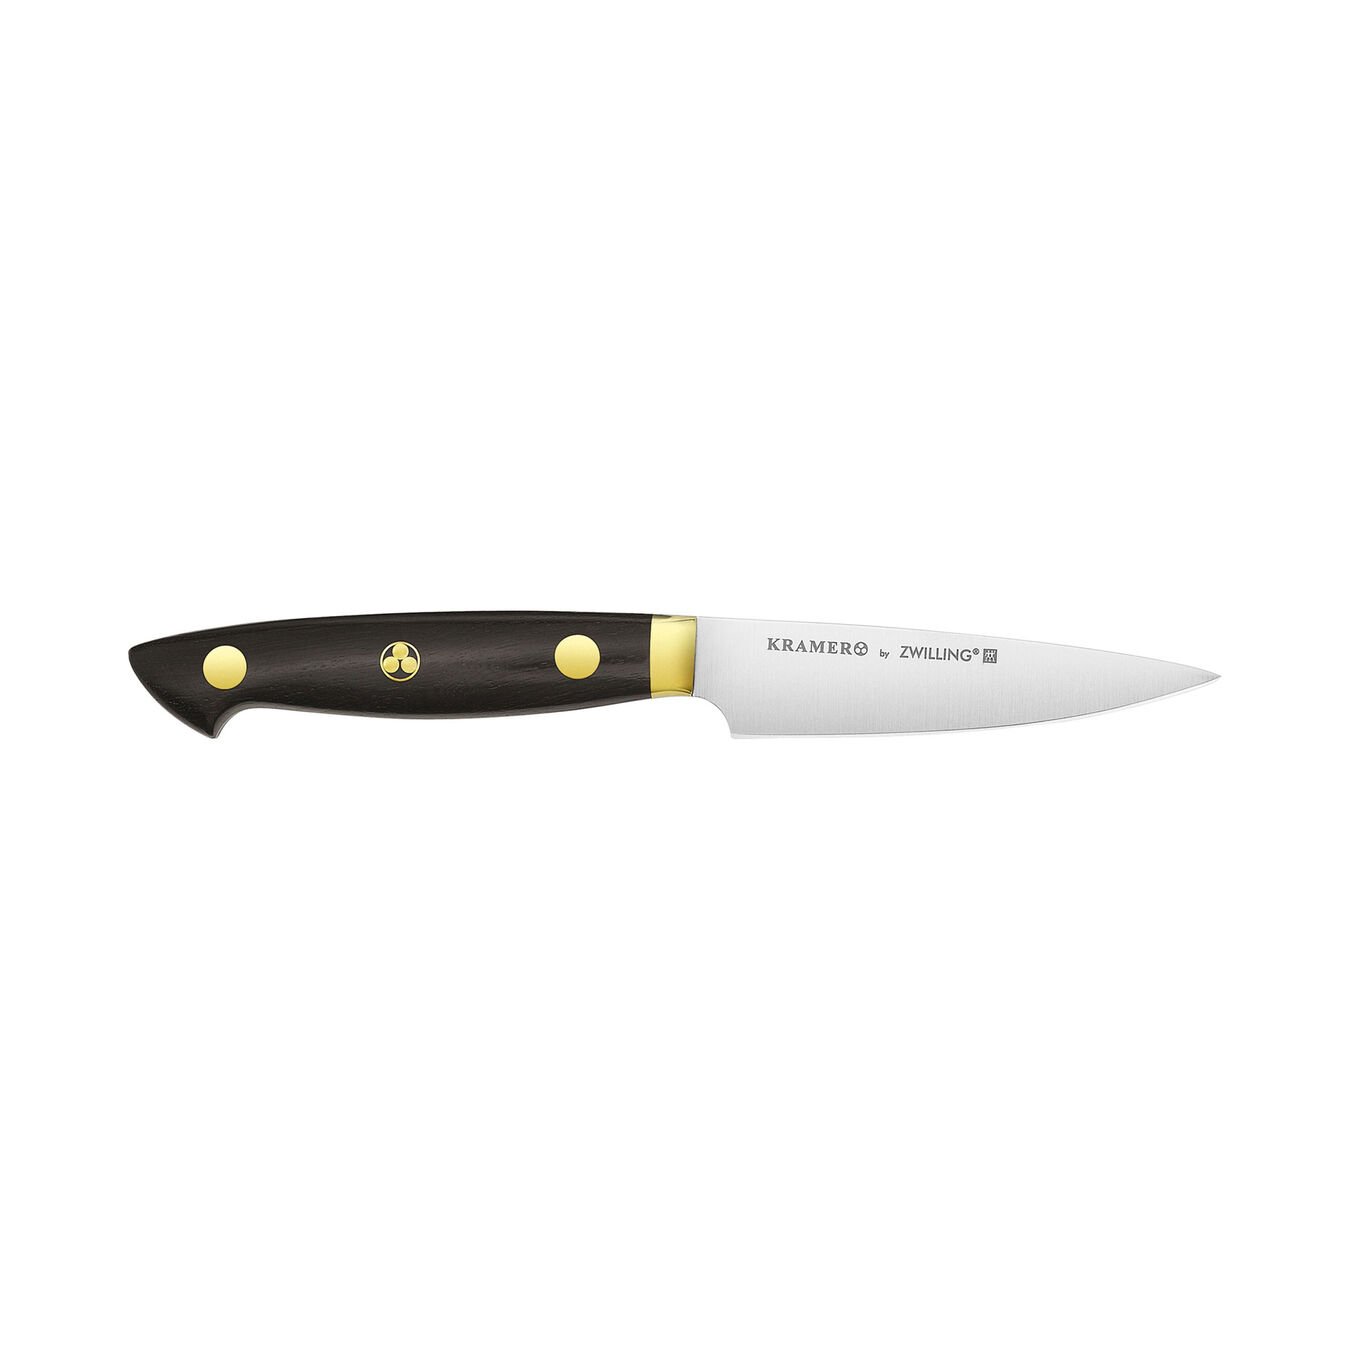 3.5 inch Paring knife - Visual Imperfections,,large 1